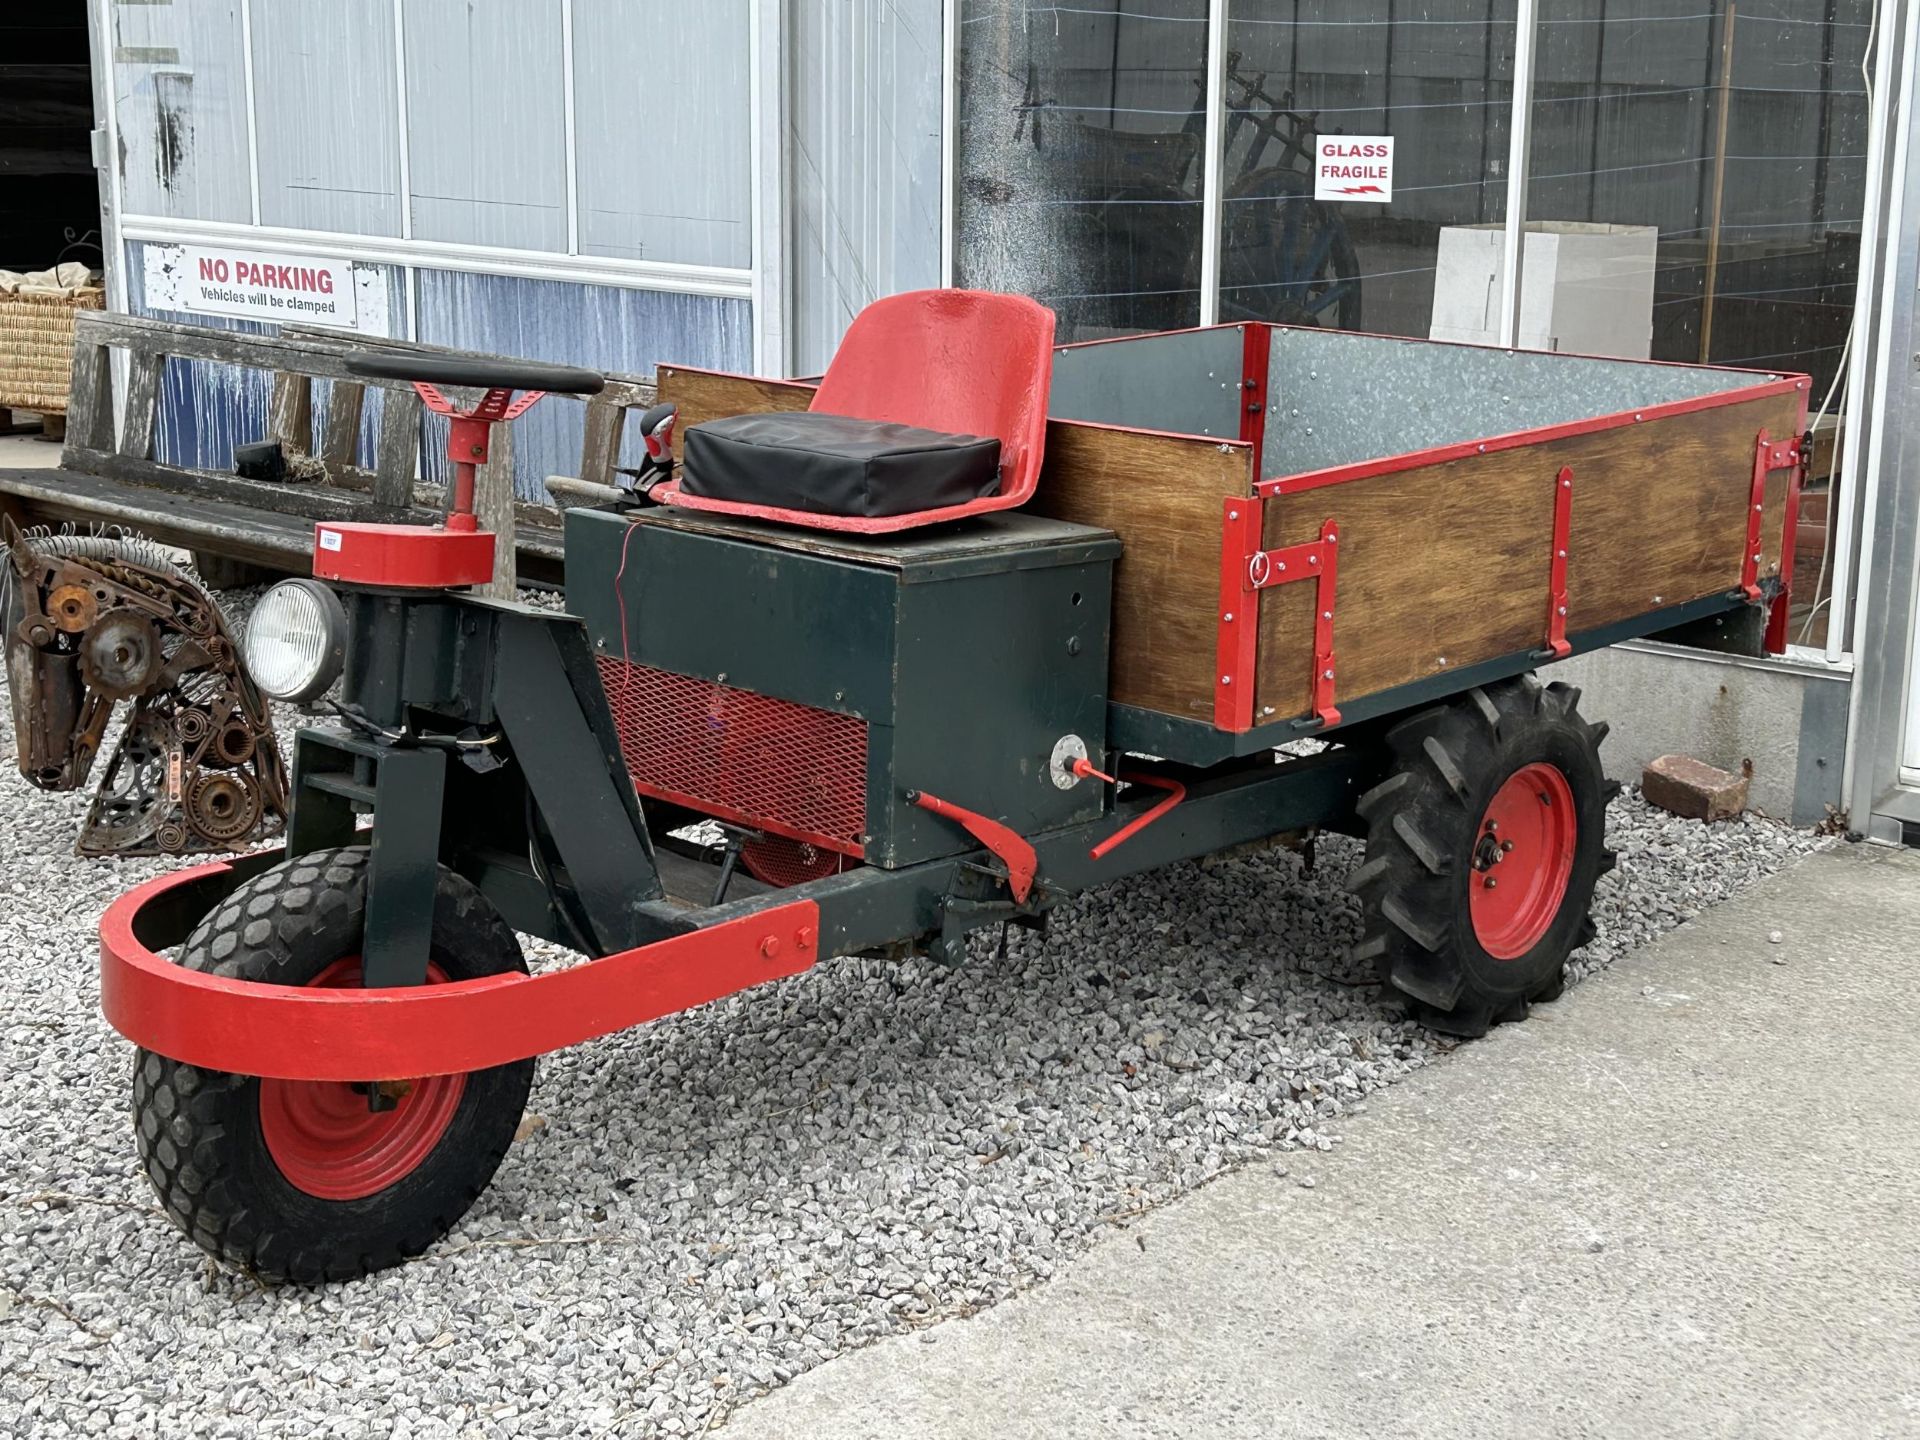 A PETROL ENGINE 'MARTIN TRUCKS BE2' MARKET GARDENERS TRICYCLE WITH MANUAL TIPPER BODY (REQUIRES A